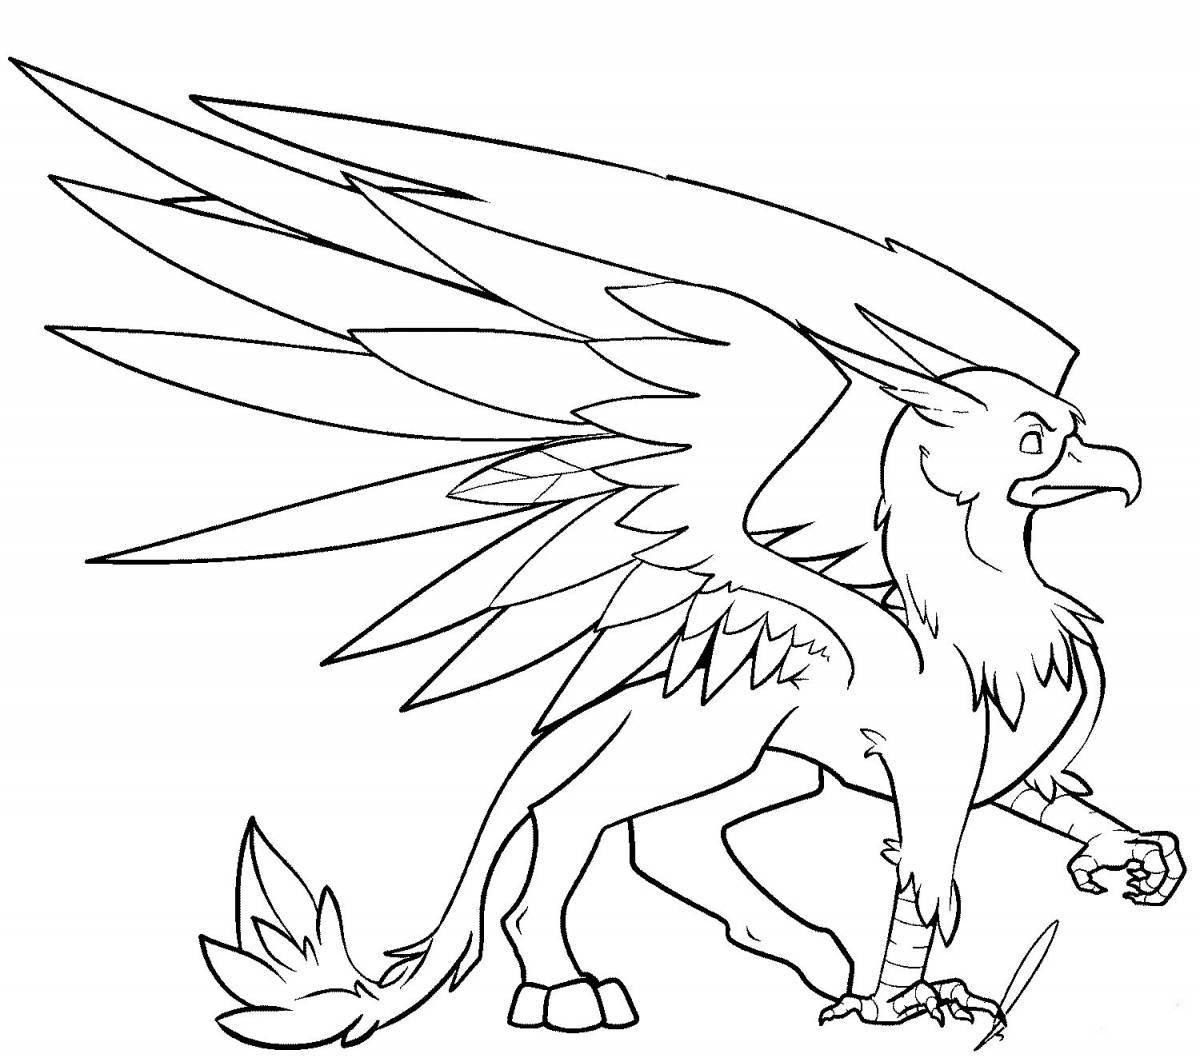 Hippogryph deluxe coloring book